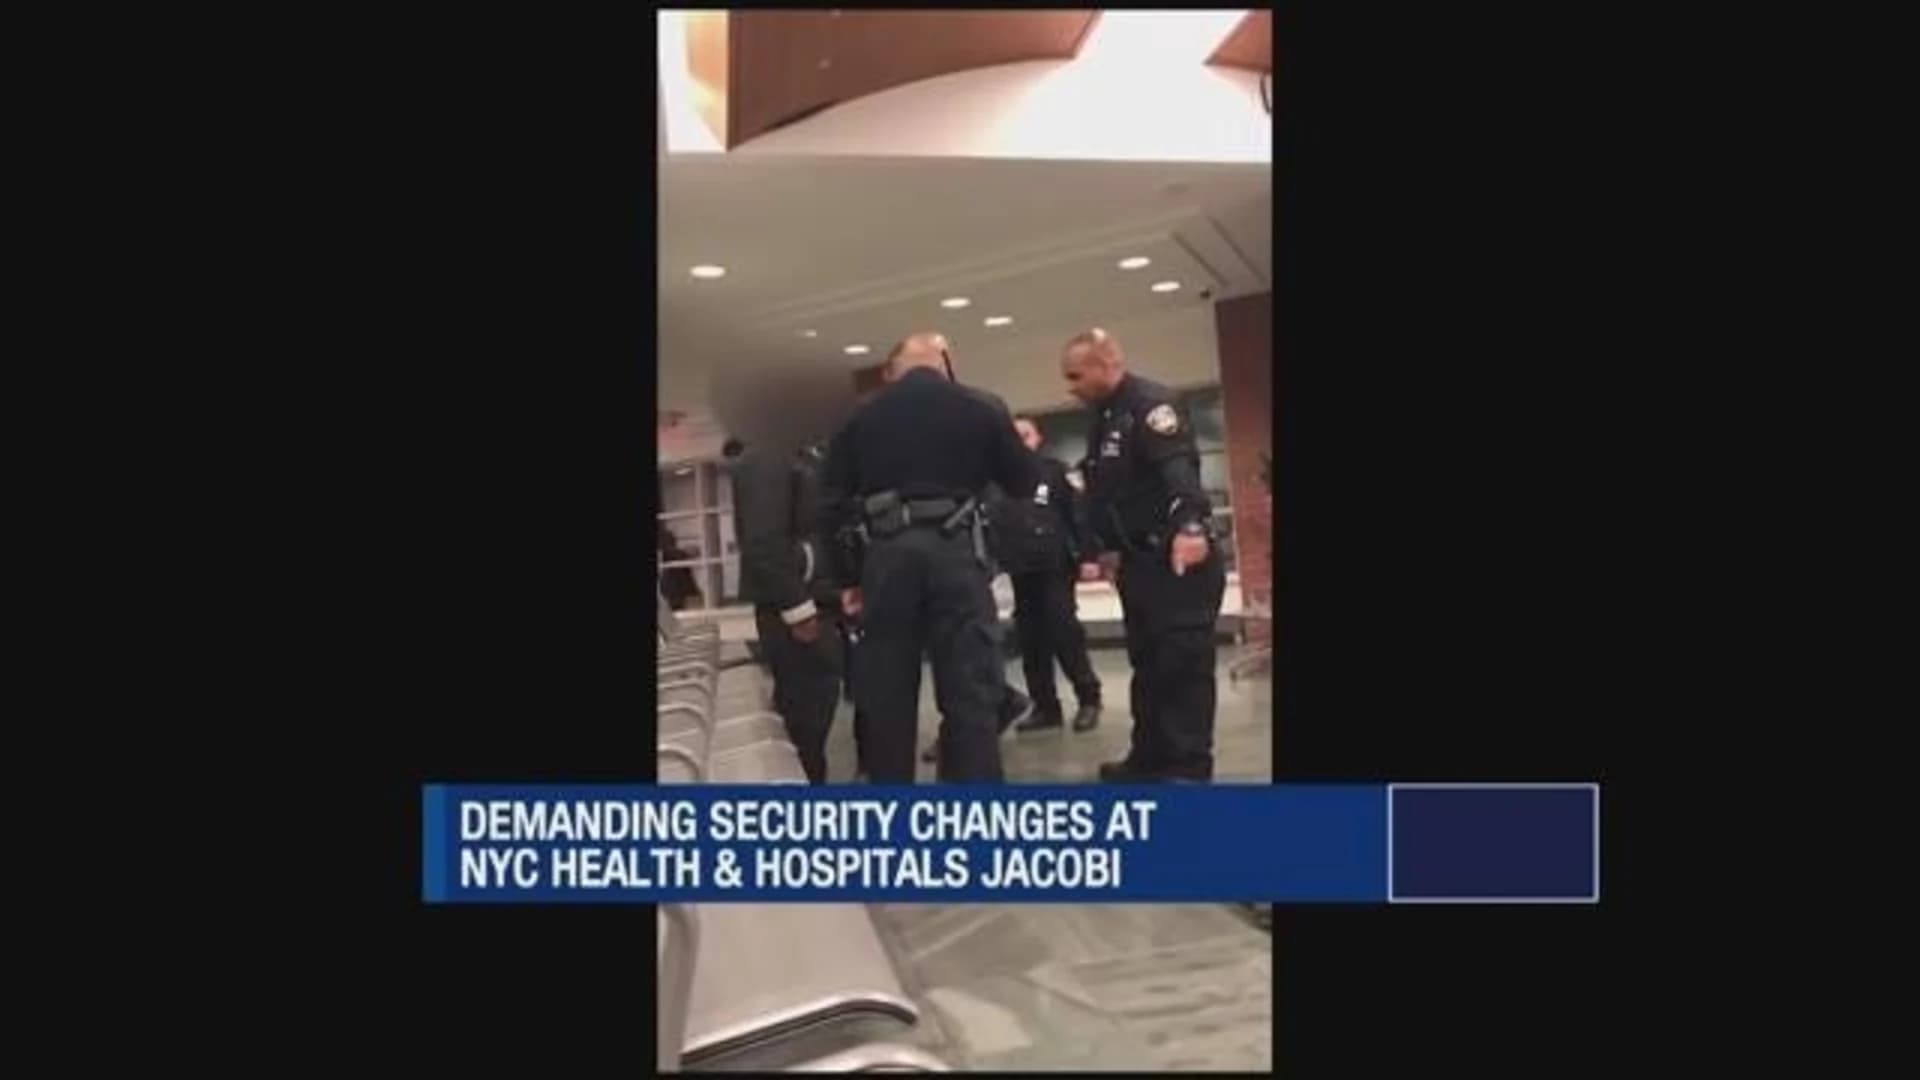 Video shows Jacobi officers surrounding, berating man in ER waiting area